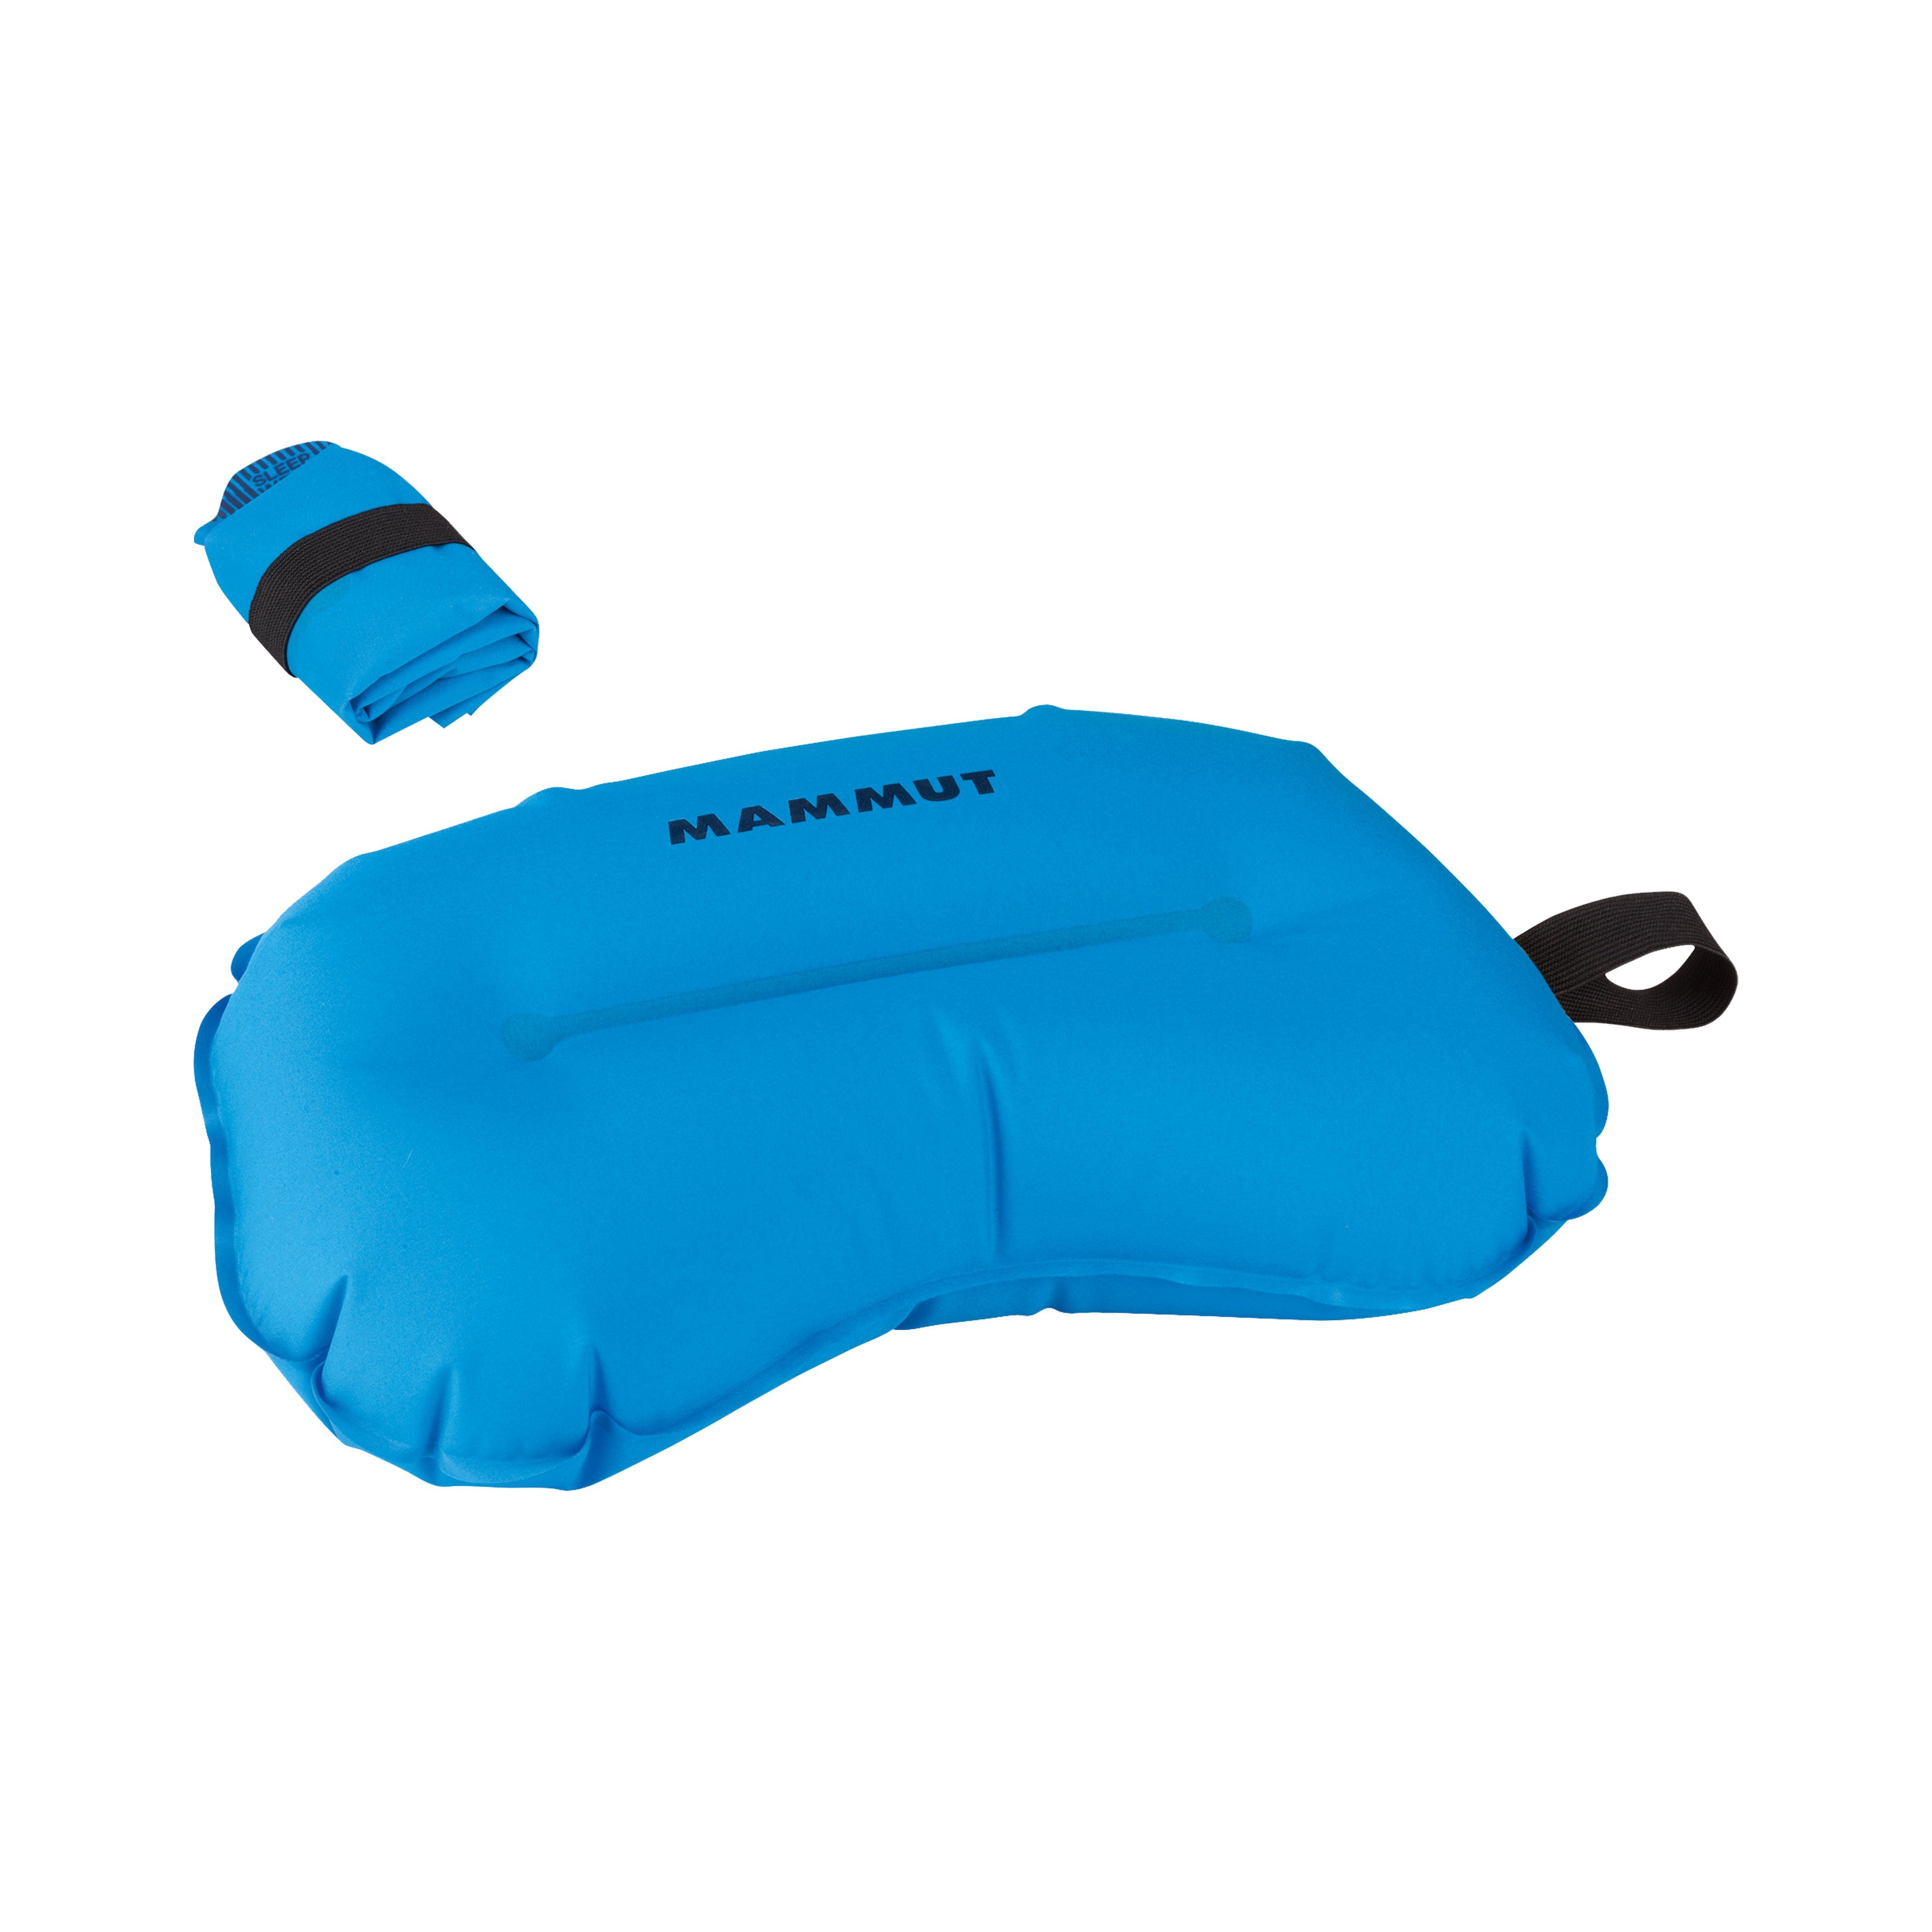 Air Pillow - imperial, one size product image